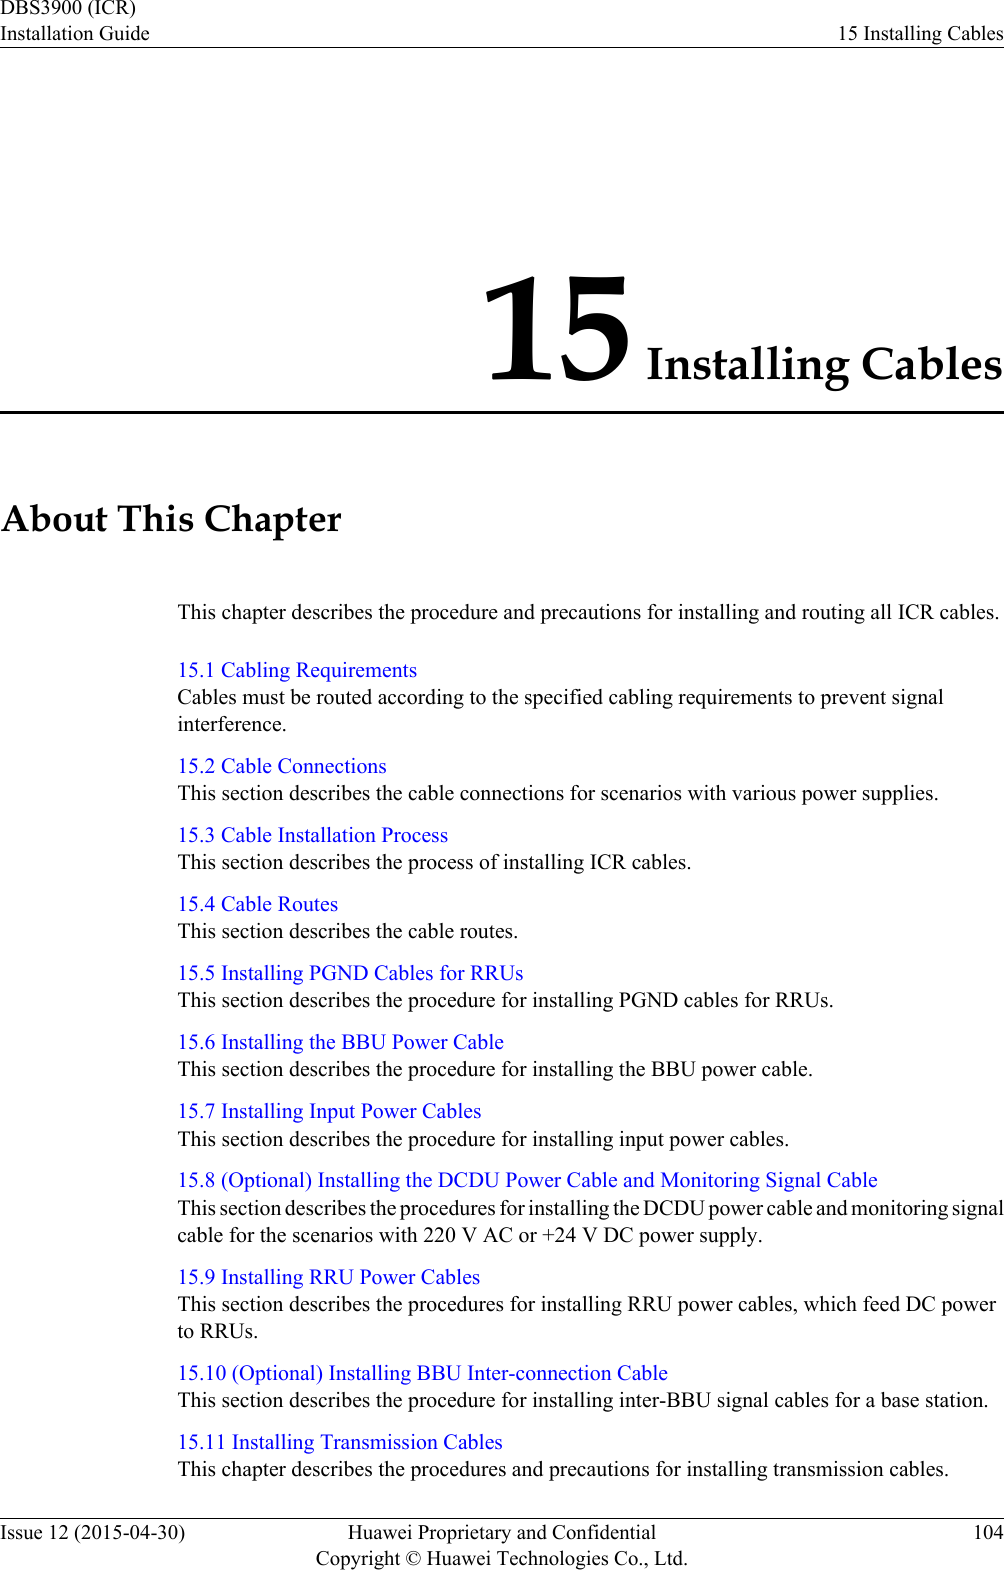 15 Installing CablesAbout This ChapterThis chapter describes the procedure and precautions for installing and routing all ICR cables.15.1 Cabling RequirementsCables must be routed according to the specified cabling requirements to prevent signalinterference.15.2 Cable ConnectionsThis section describes the cable connections for scenarios with various power supplies.15.3 Cable Installation ProcessThis section describes the process of installing ICR cables.15.4 Cable RoutesThis section describes the cable routes.15.5 Installing PGND Cables for RRUsThis section describes the procedure for installing PGND cables for RRUs.15.6 Installing the BBU Power CableThis section describes the procedure for installing the BBU power cable.15.7 Installing Input Power CablesThis section describes the procedure for installing input power cables.15.8 (Optional) Installing the DCDU Power Cable and Monitoring Signal CableThis section describes the procedures for installing the DCDU power cable and monitoring signalcable for the scenarios with 220 V AC or +24 V DC power supply.15.9 Installing RRU Power CablesThis section describes the procedures for installing RRU power cables, which feed DC powerto RRUs.15.10 (Optional) Installing BBU Inter-connection CableThis section describes the procedure for installing inter-BBU signal cables for a base station.15.11 Installing Transmission CablesThis chapter describes the procedures and precautions for installing transmission cables.DBS3900 (ICR)Installation Guide 15 Installing CablesIssue 12 (2015-04-30) Huawei Proprietary and ConfidentialCopyright © Huawei Technologies Co., Ltd.104